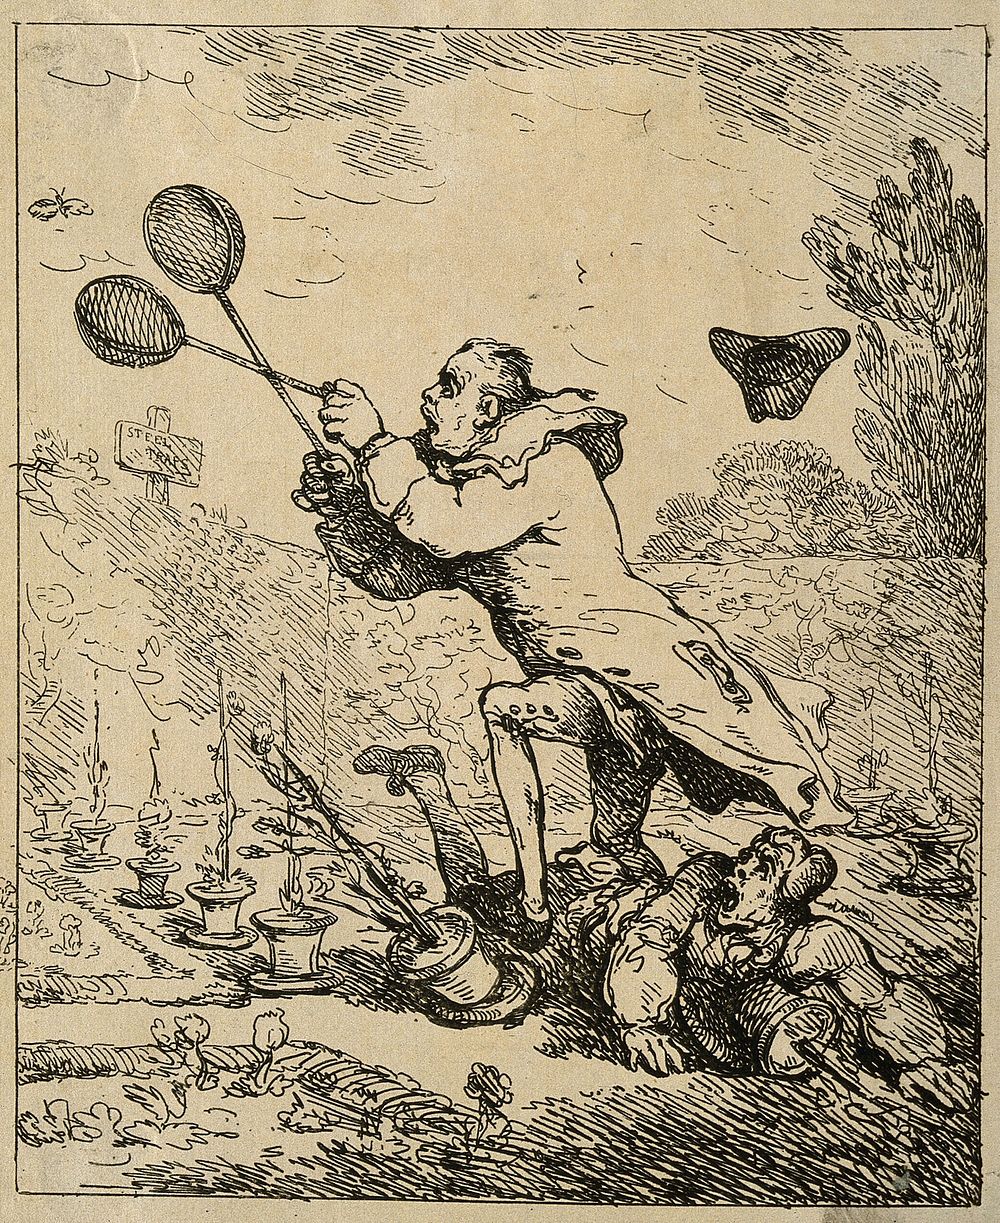 Sir Joseph Banks chasing the butterfly called the Emperor of Morocco. Etching attributed to T. Rowlandson, 1788.